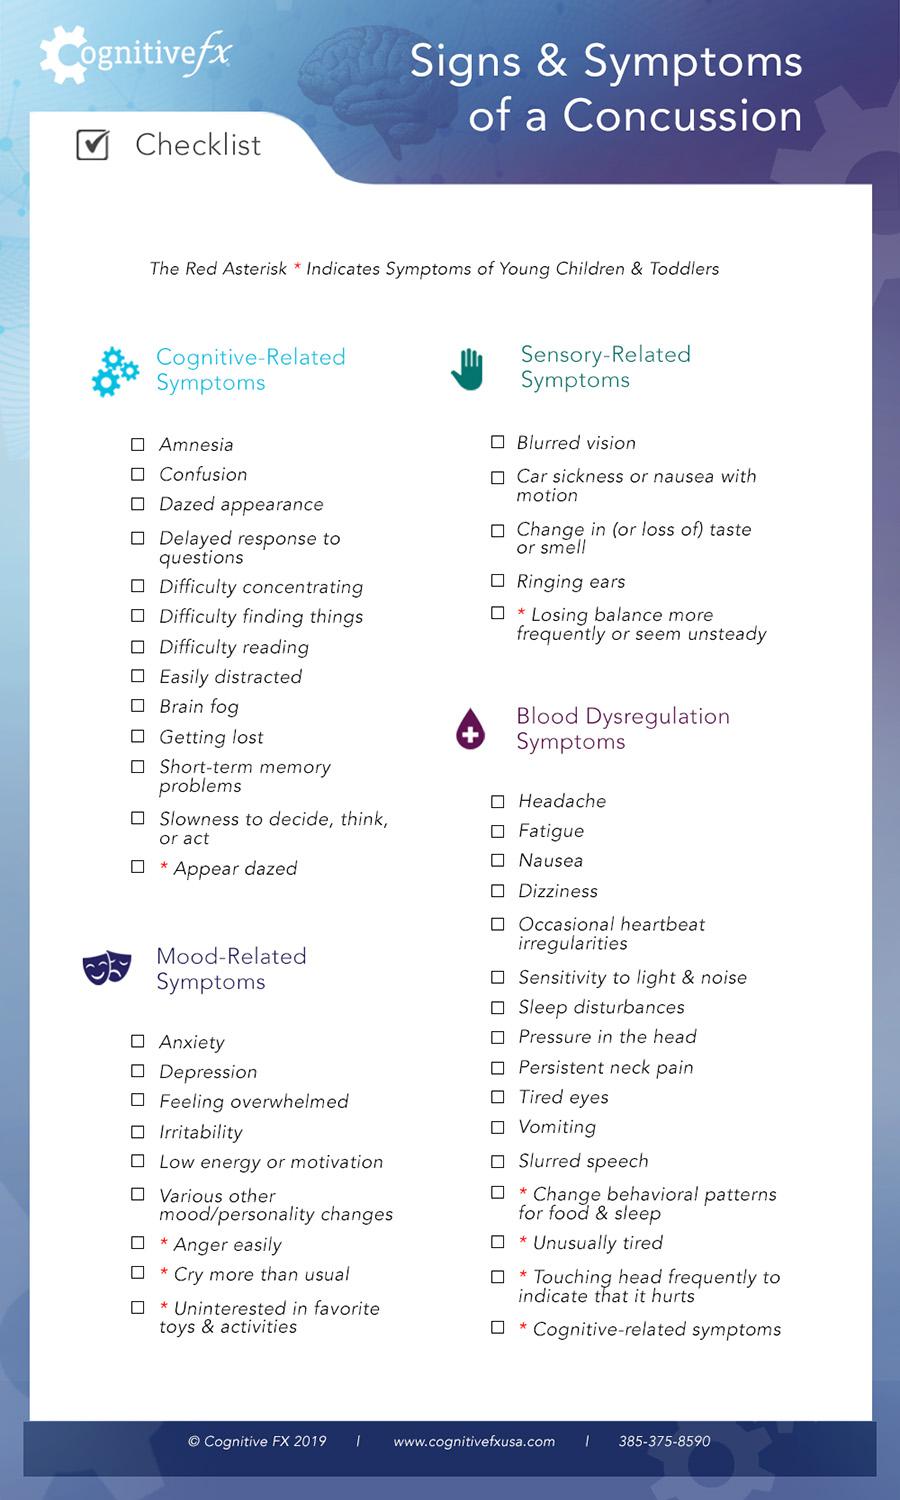 Signs and symptoms of a Concussion checklist. 